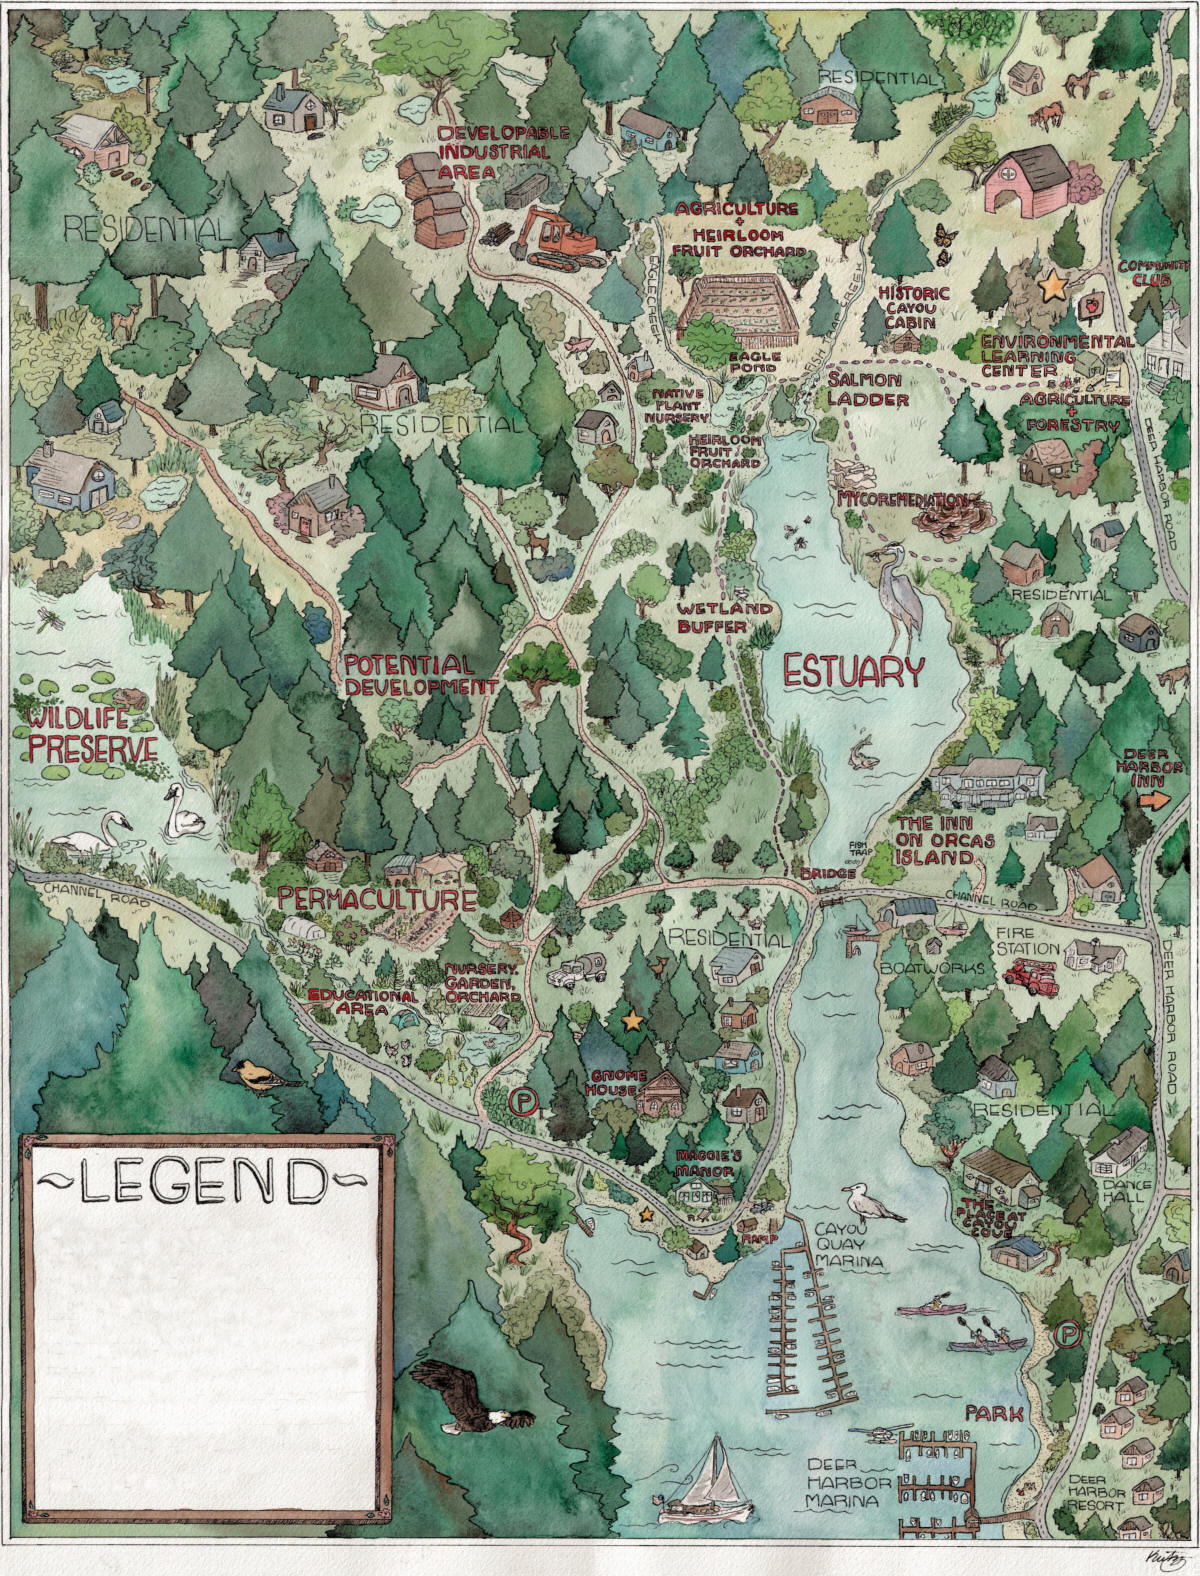 Illustrated map of Connor Deer Harbor Estate prepared by Erica Kutz Graphic Artist